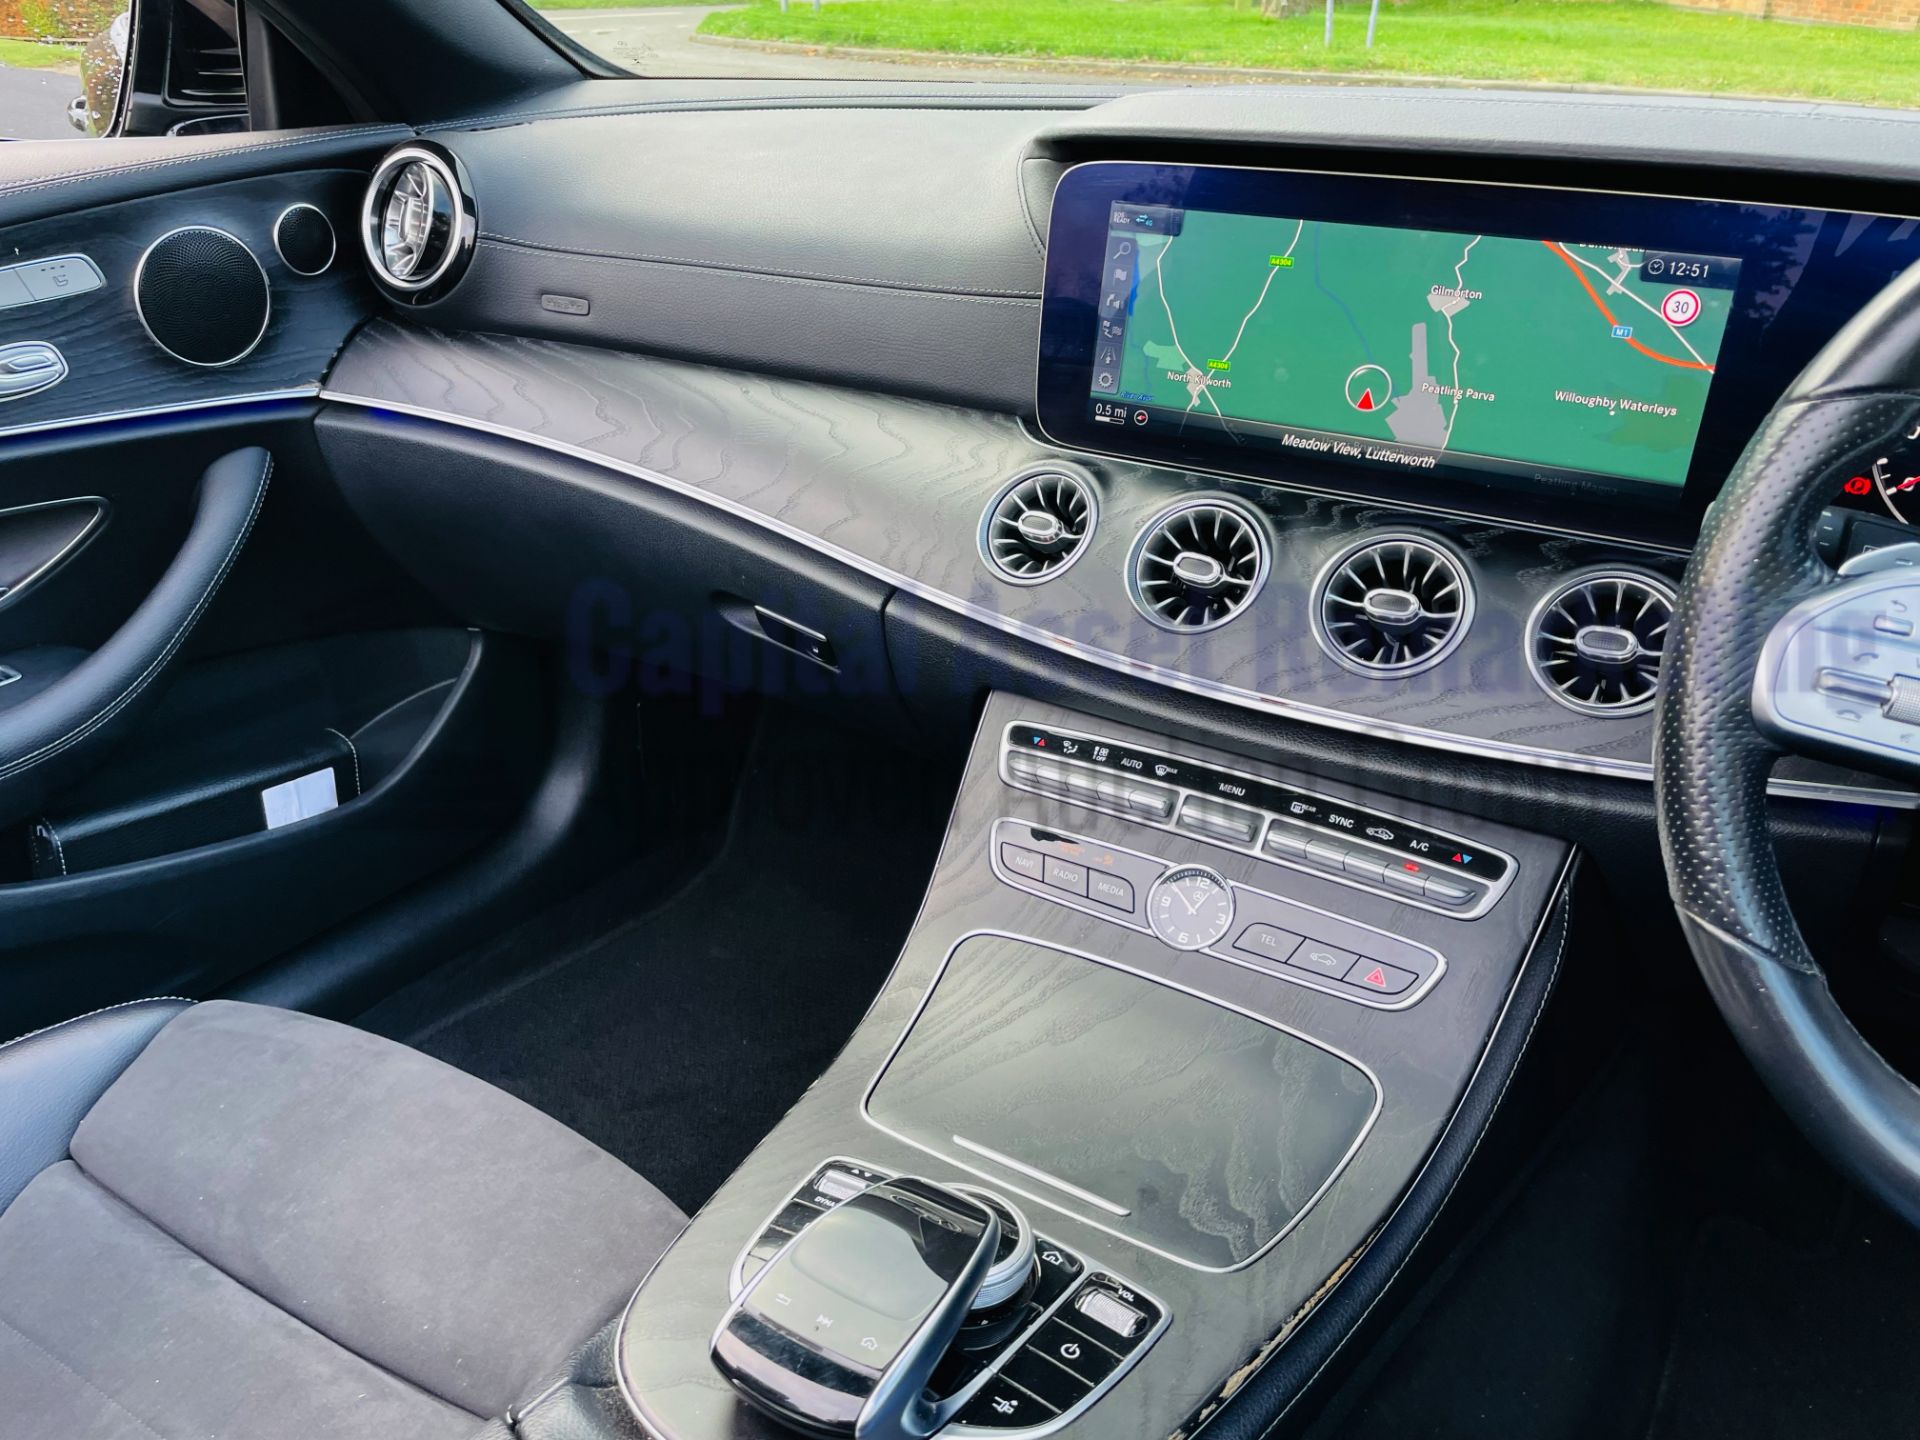 MERCEDES-BENZ E220D *AMG LINE - CABRIOLET* (2019 - EURO 6) '9G TRONIC AUTO - SAT NAV' *FULLY LOADED* - Image 55 of 66